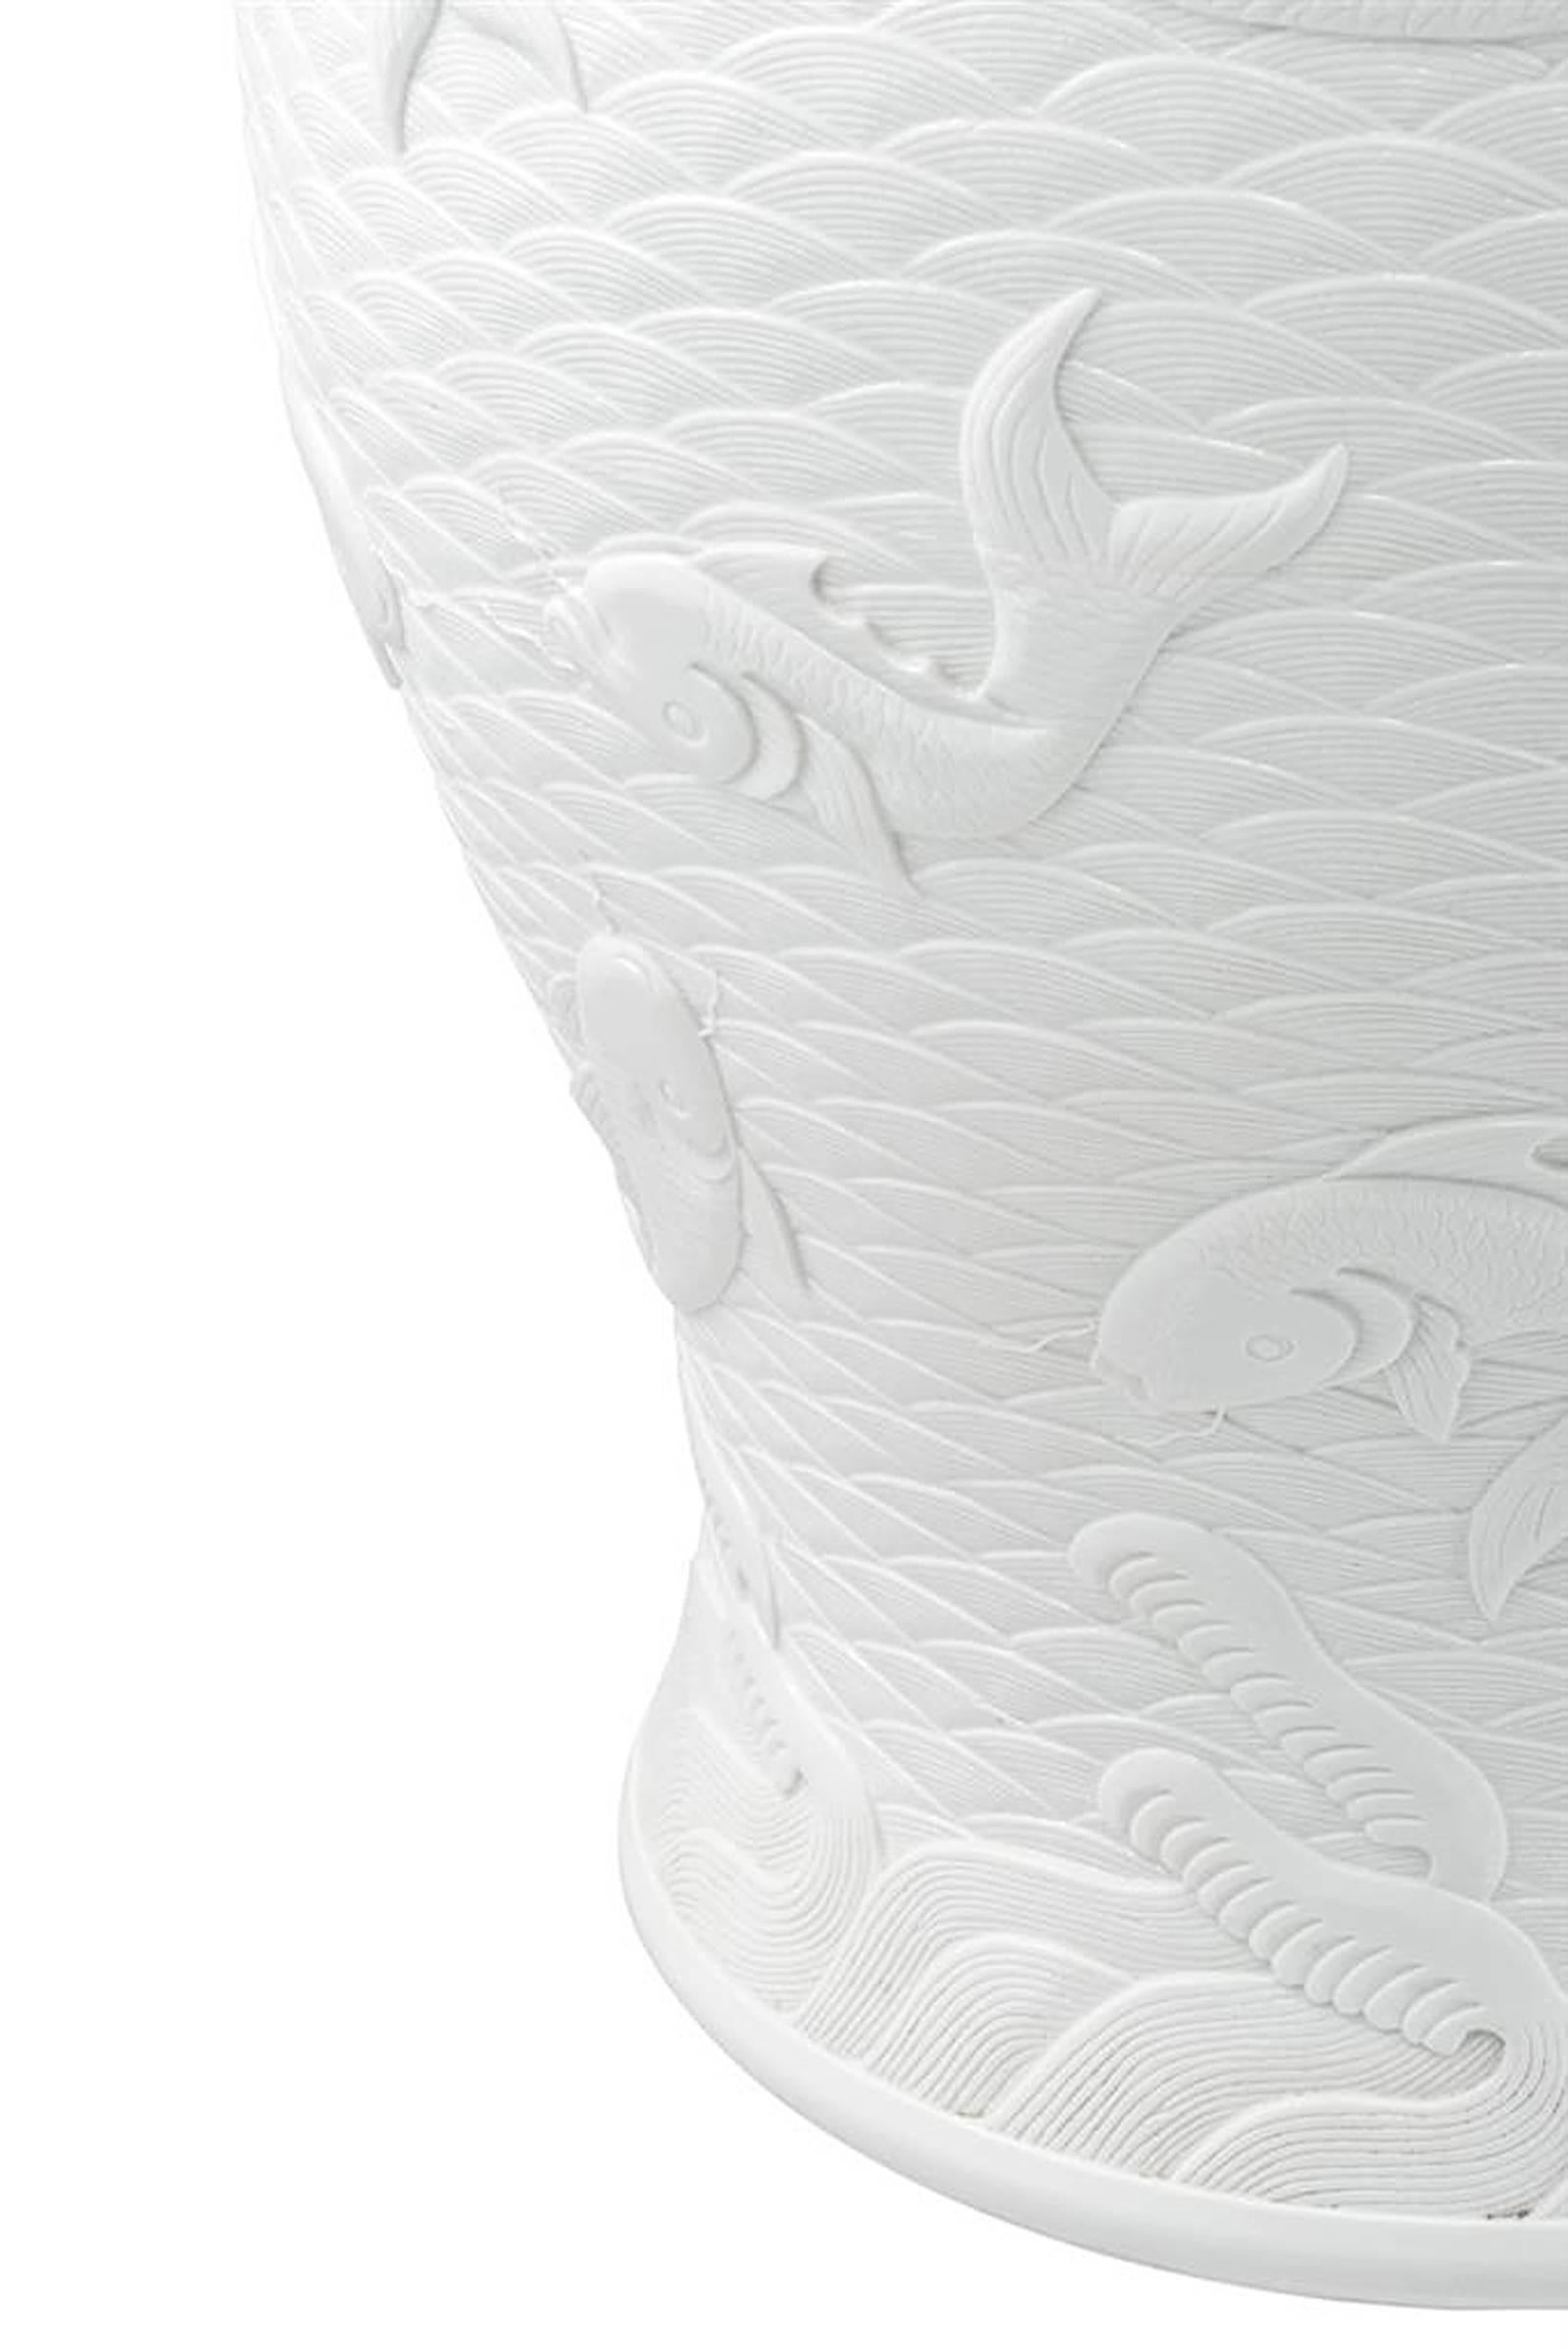 Contemporary Karps Vase in White Relief Ceramic with Japanese Fishes